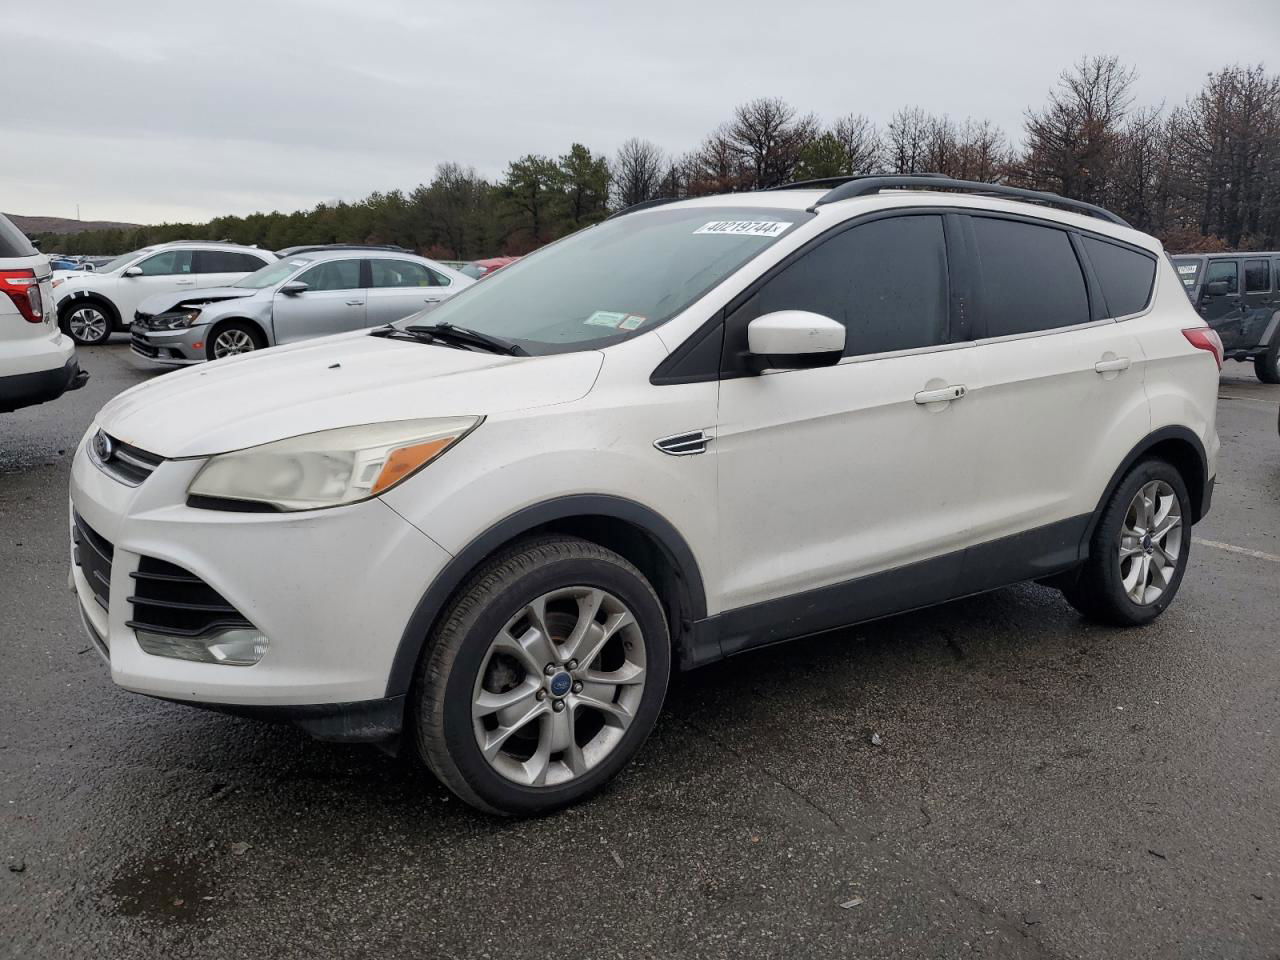 2013 Ford Escape Sel Белый vin: 1FMCU9H92DUC58247